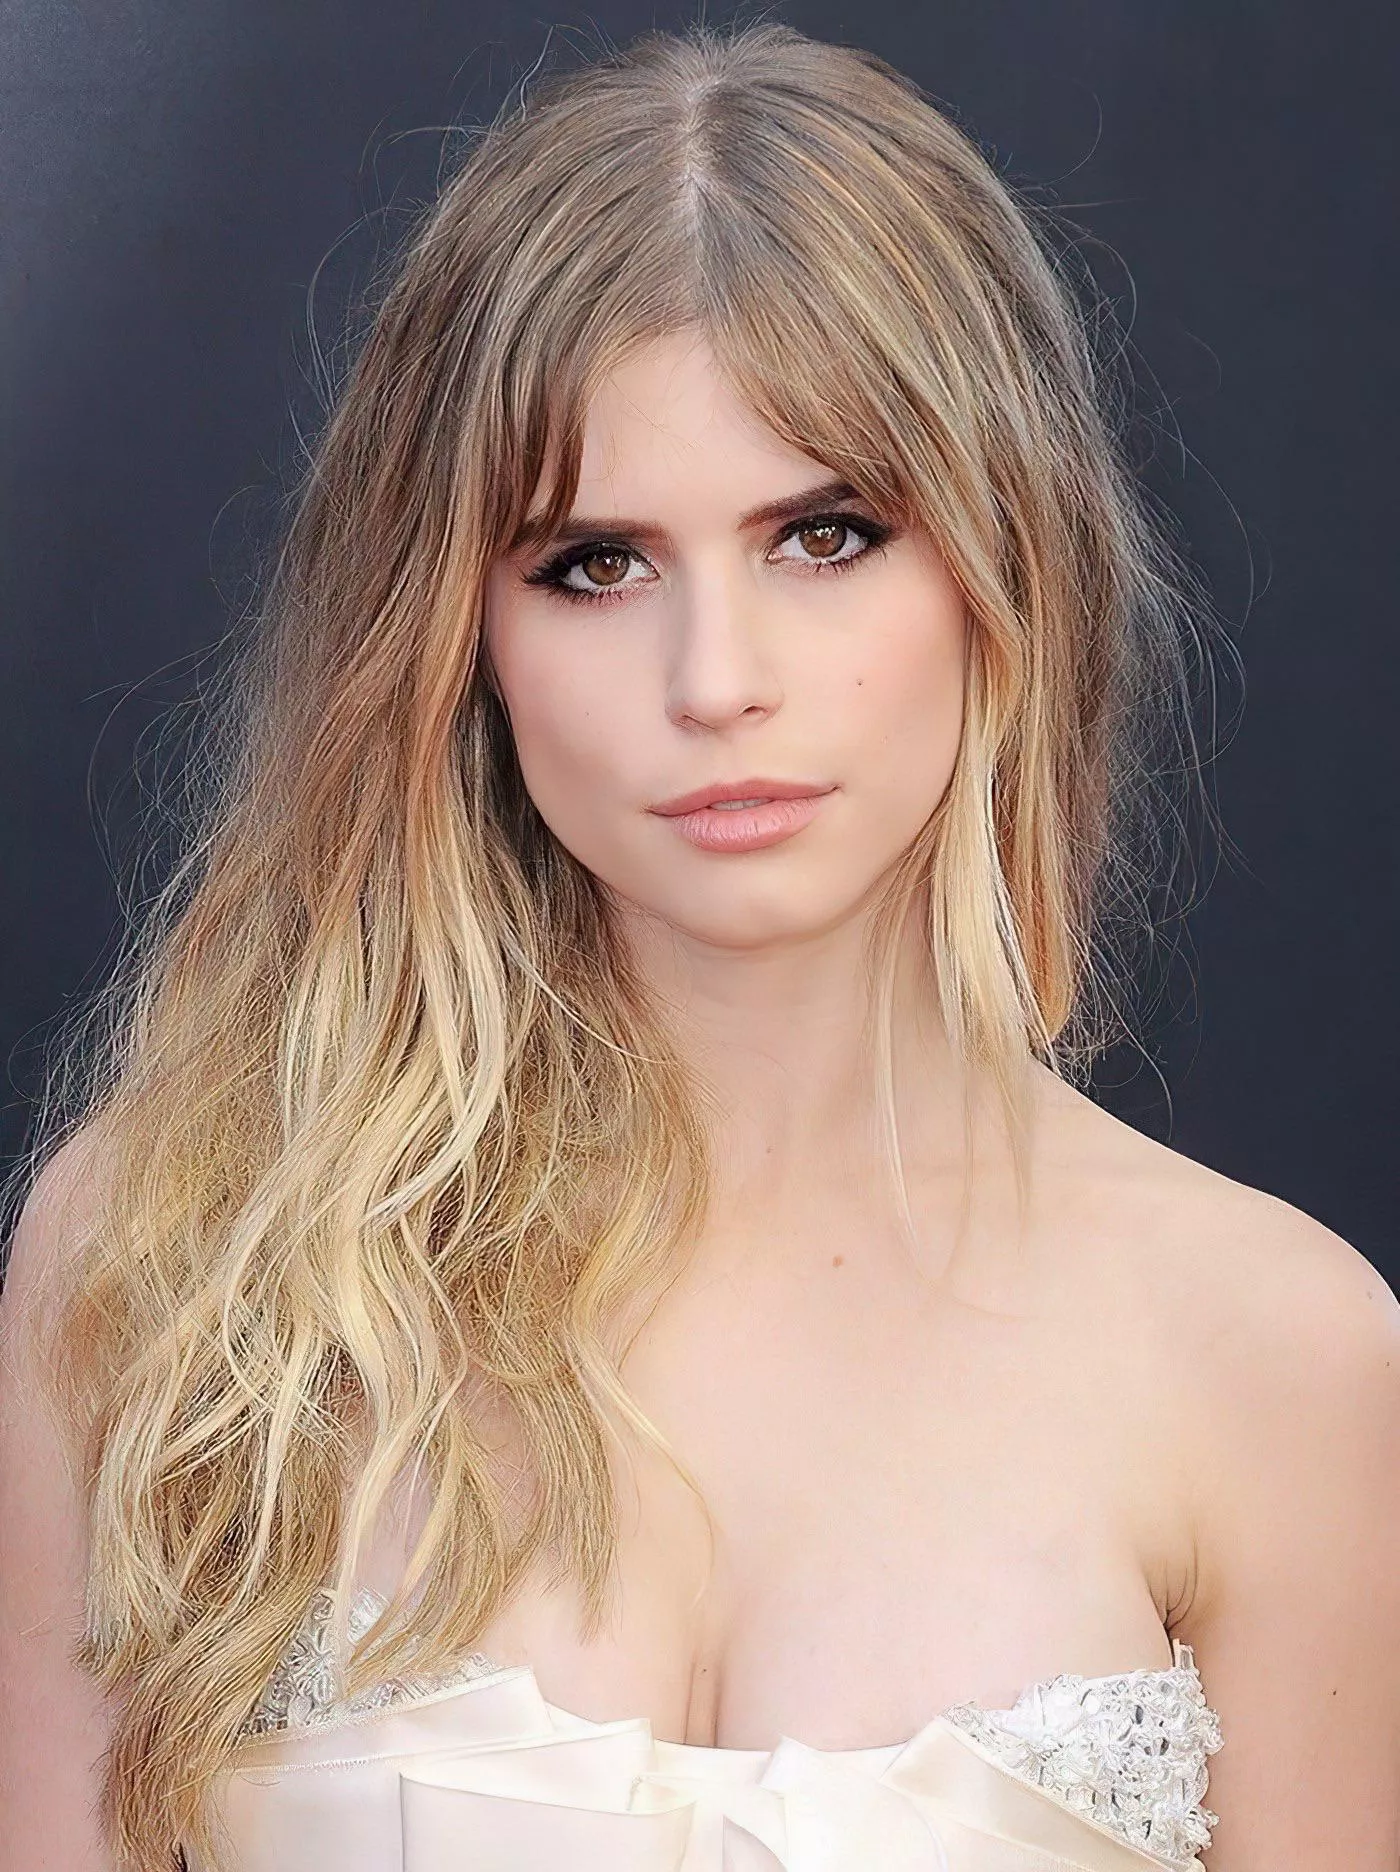 chhabi pokhrel recommends carlson young nude pic